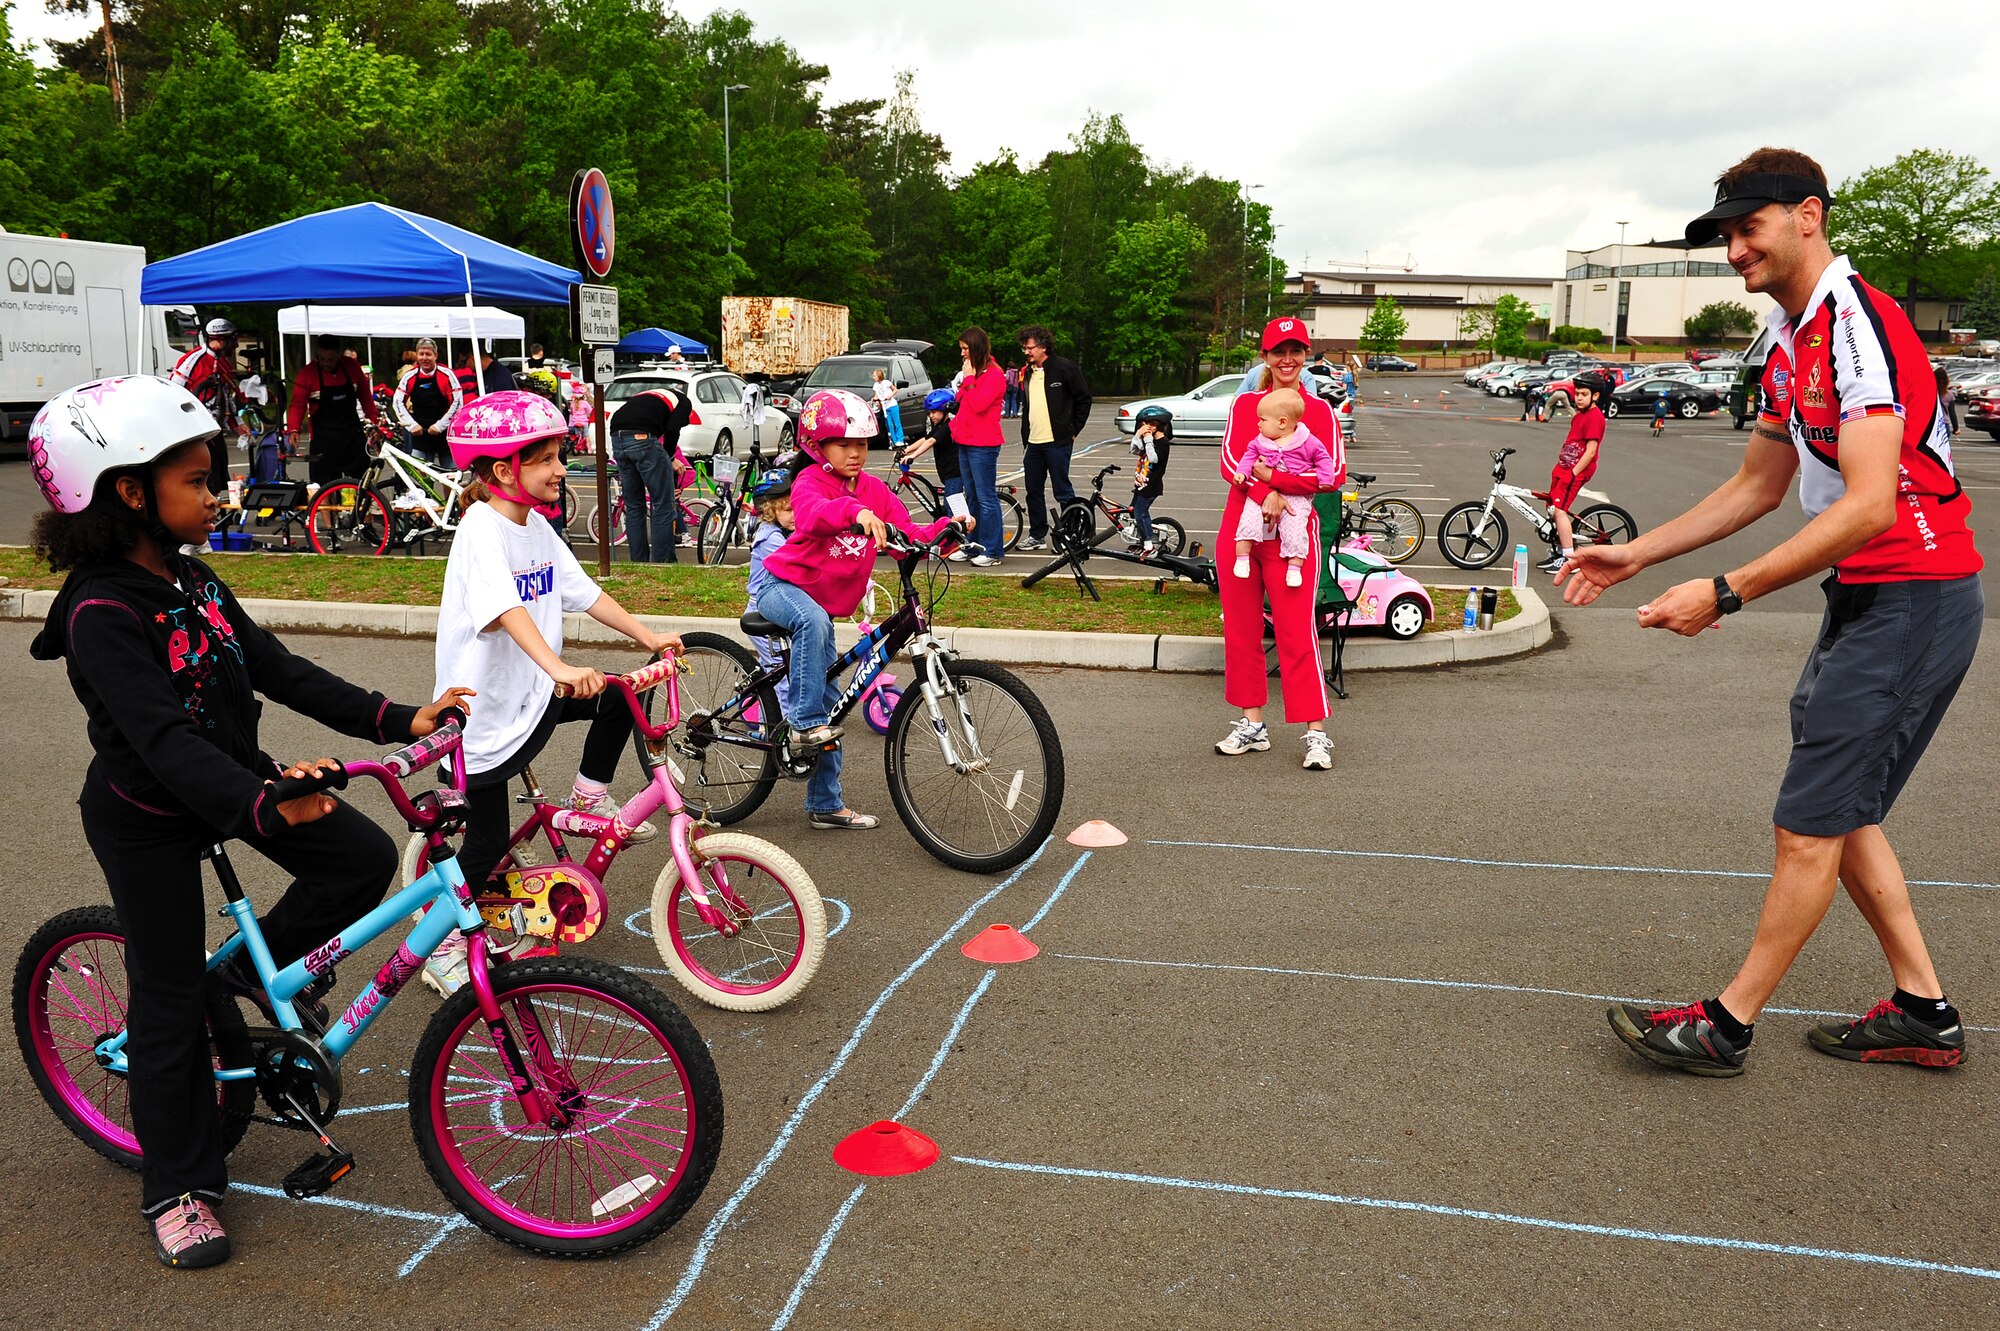 Children participate in the bicycle rodeo May 19, 2012, Ramstein Air Base, Germany. The rodeo was designed to teach children better biking skills. Children received bike inspections and safety, learned bicycle-handling skills and traffic rules. (U.S. Air Force photo/Airman 1st Class Holly Cook)